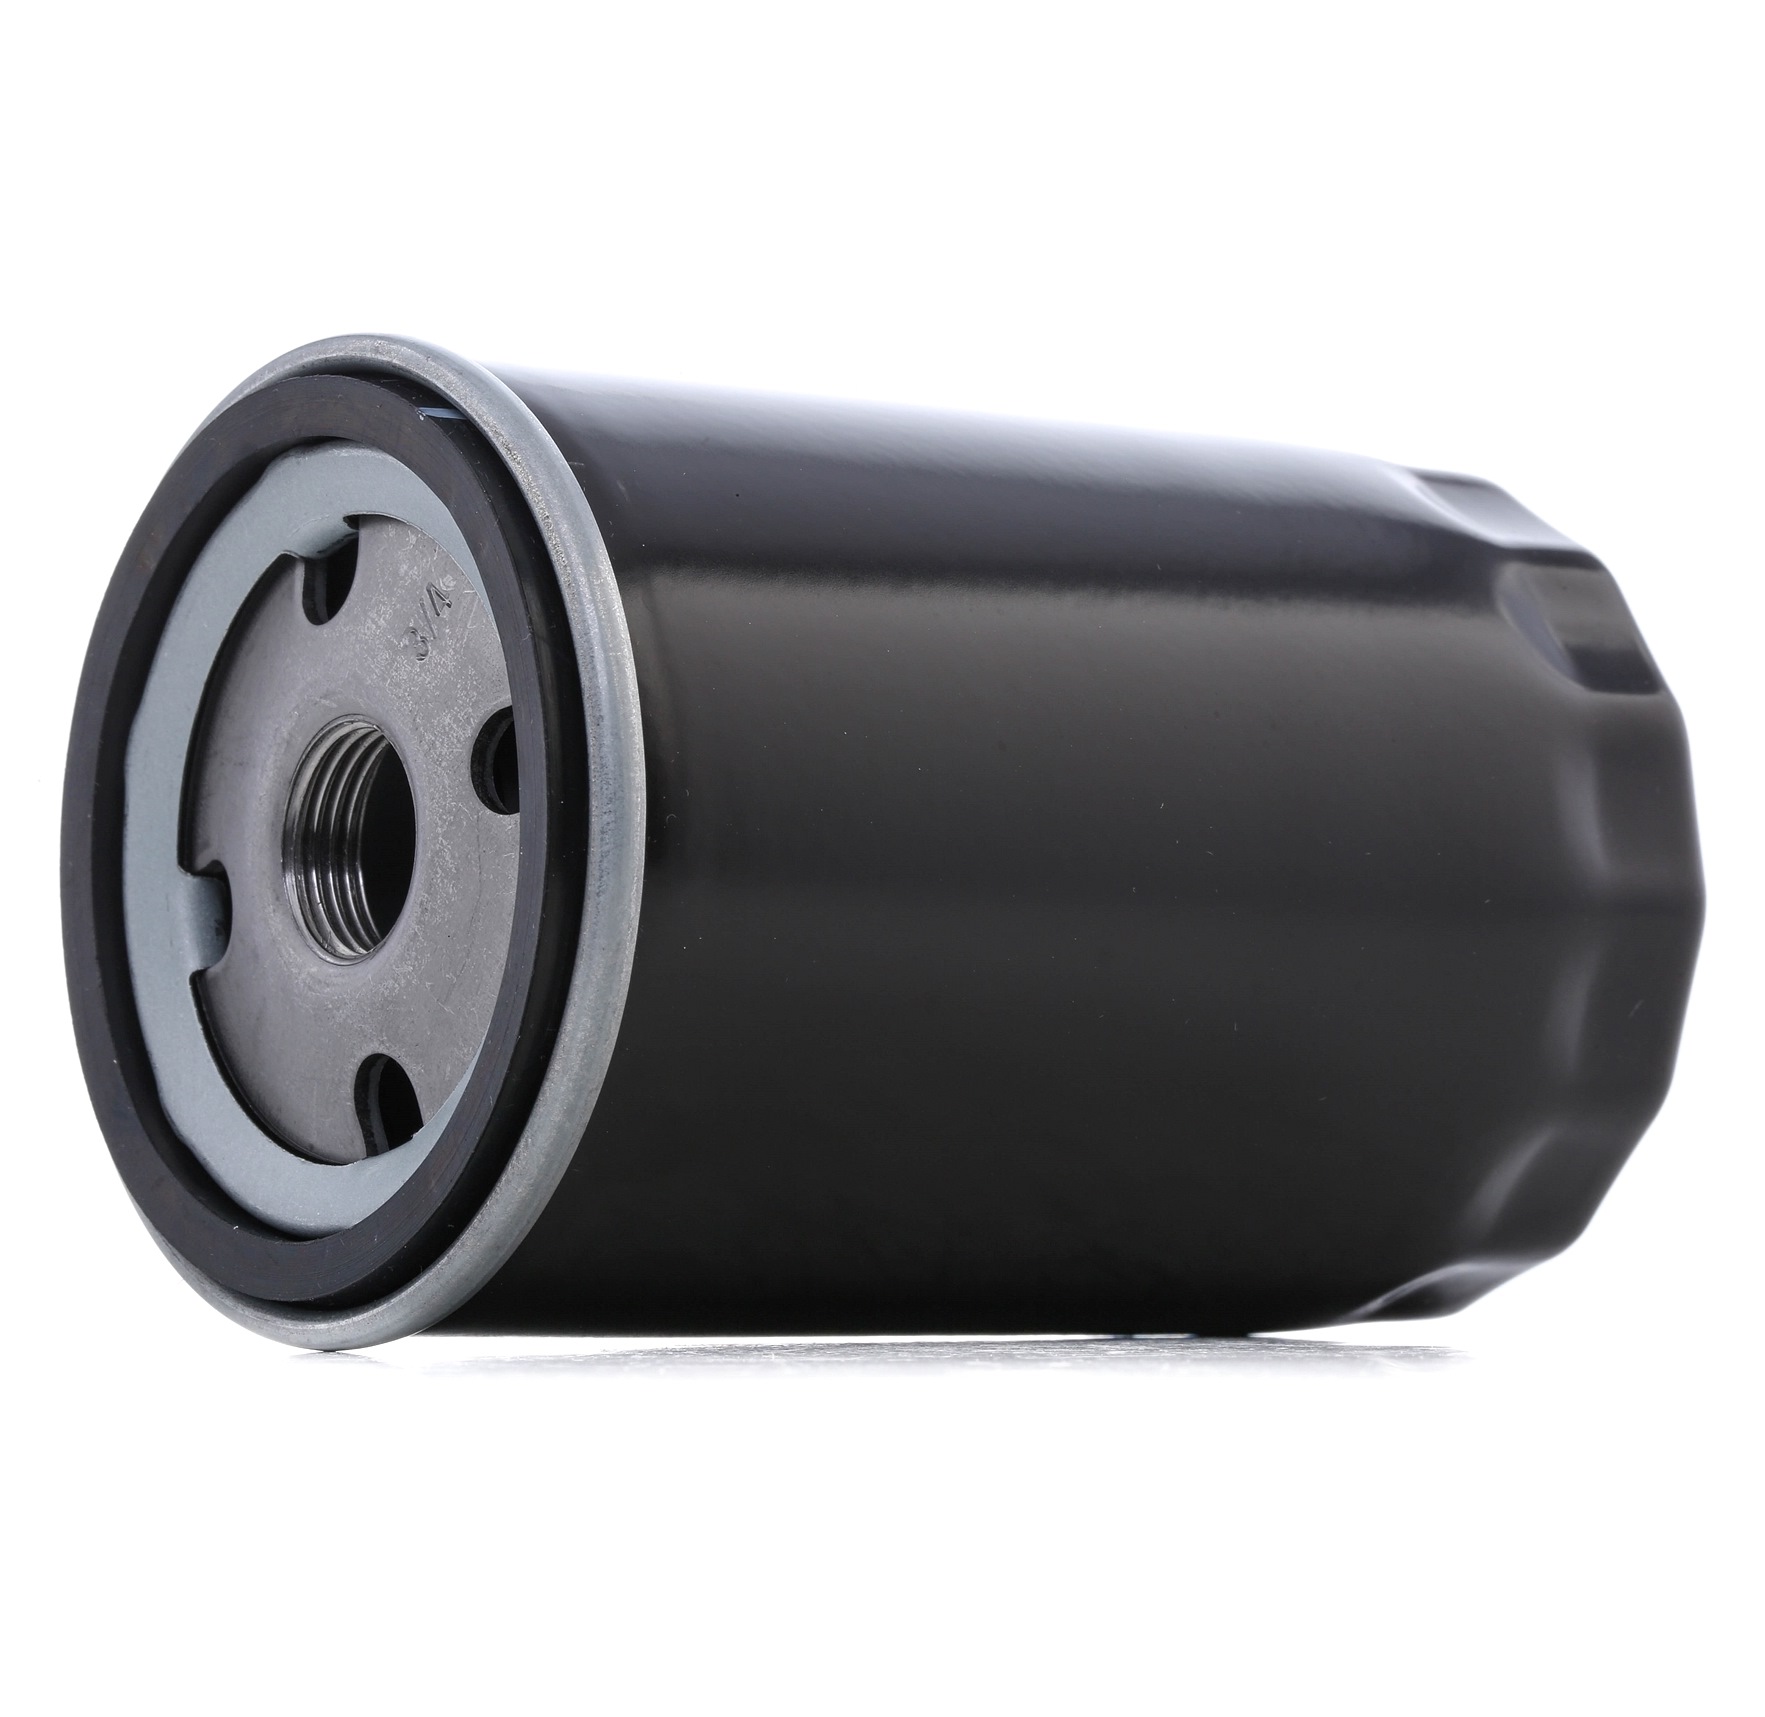 7O0006P RIDEX PLUS Oil filters SEAT 3/4-16 UNF, with one anti-return valve, Spin-on Filter